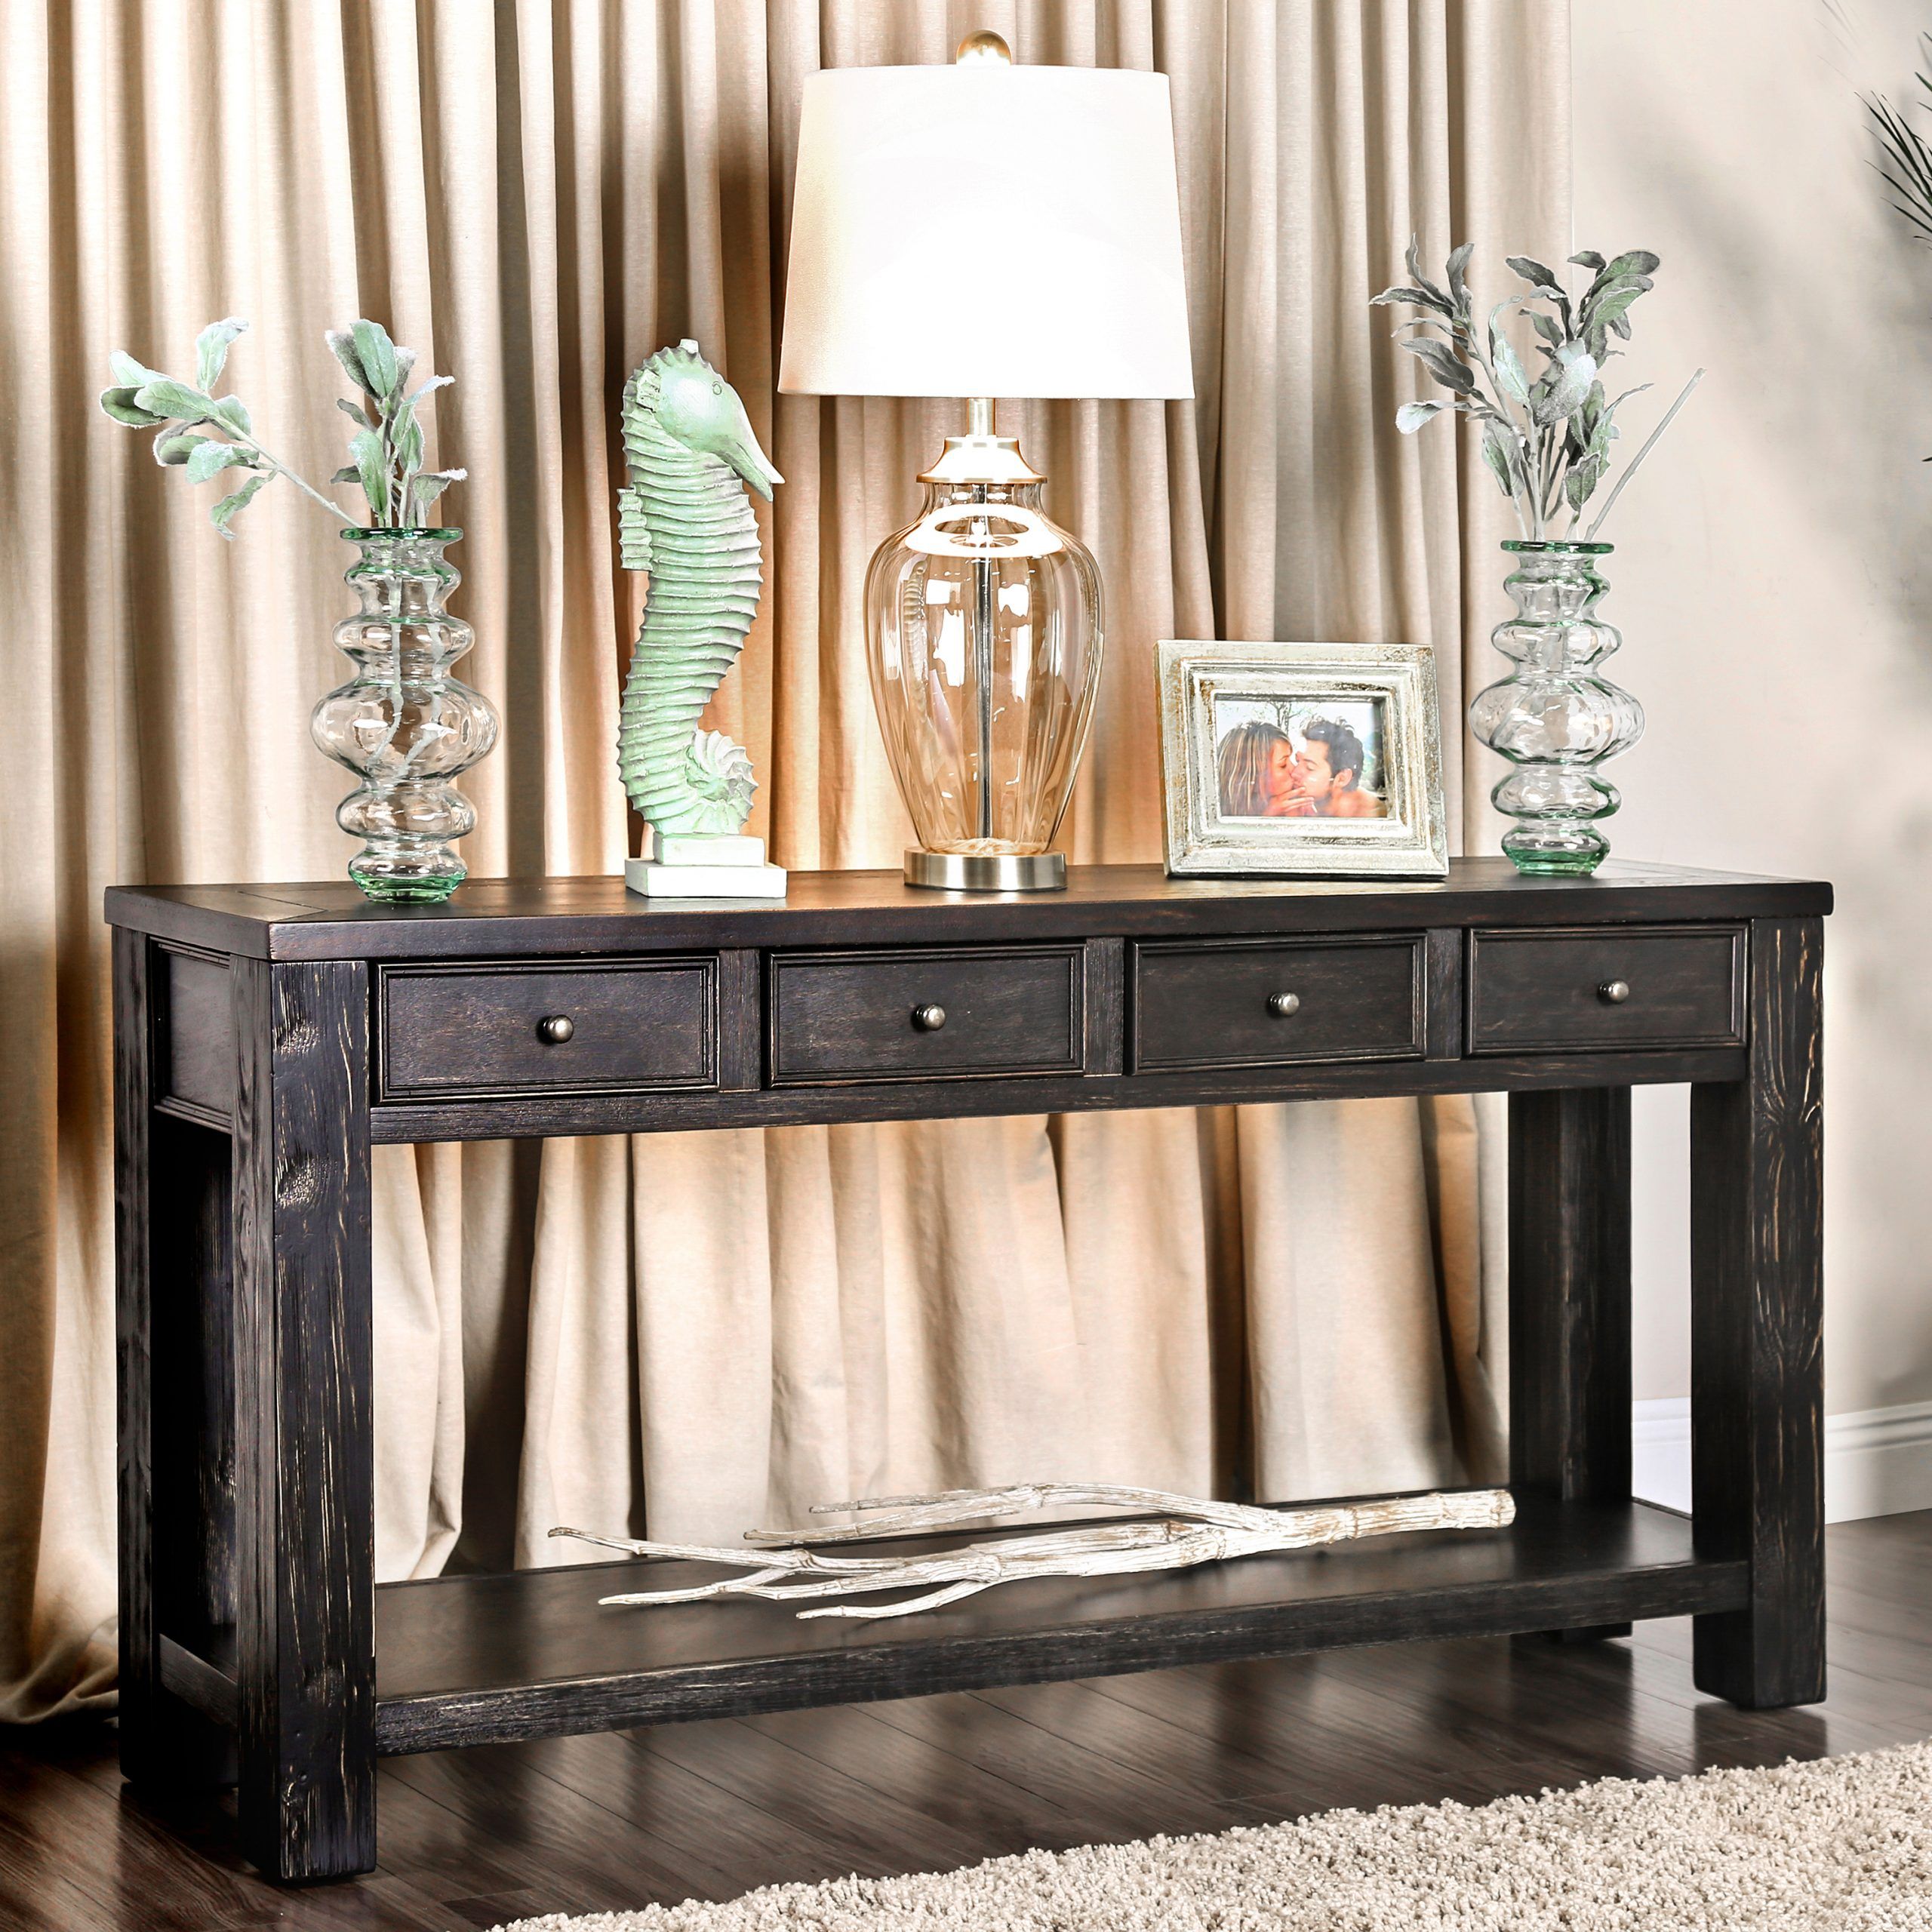 Furniture Of America Keller Rustic 4 Drawer Sofa Table, Antique Black Throughout Rustic Oak And Black Console Tables (View 9 of 20)